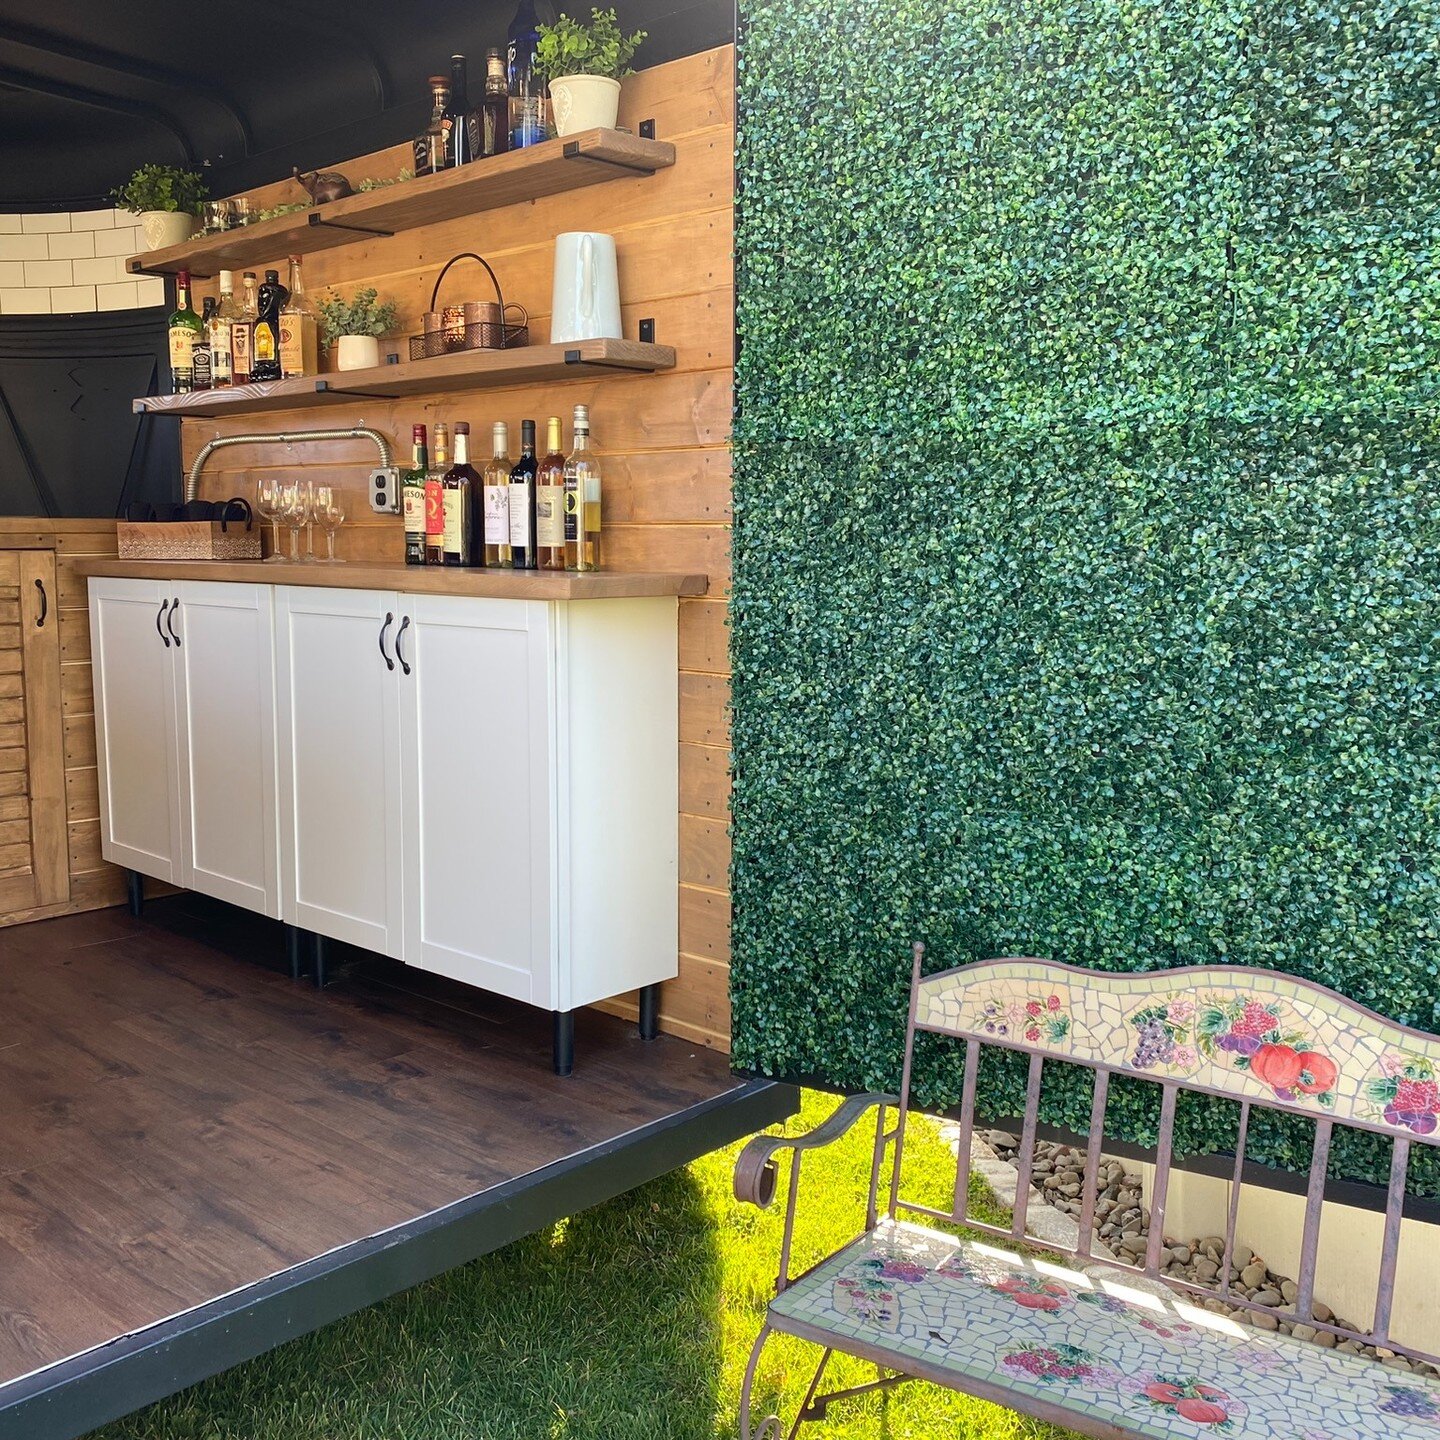 Look at this gorgeous grass wall you can pose in front of! 📸

Are you having a themed party? We can decorate the trailer and grass wall to compliment your motif or you can decorate it yourself however you'd like. 🎈

#mobilebar #mobilebarforhire #ho